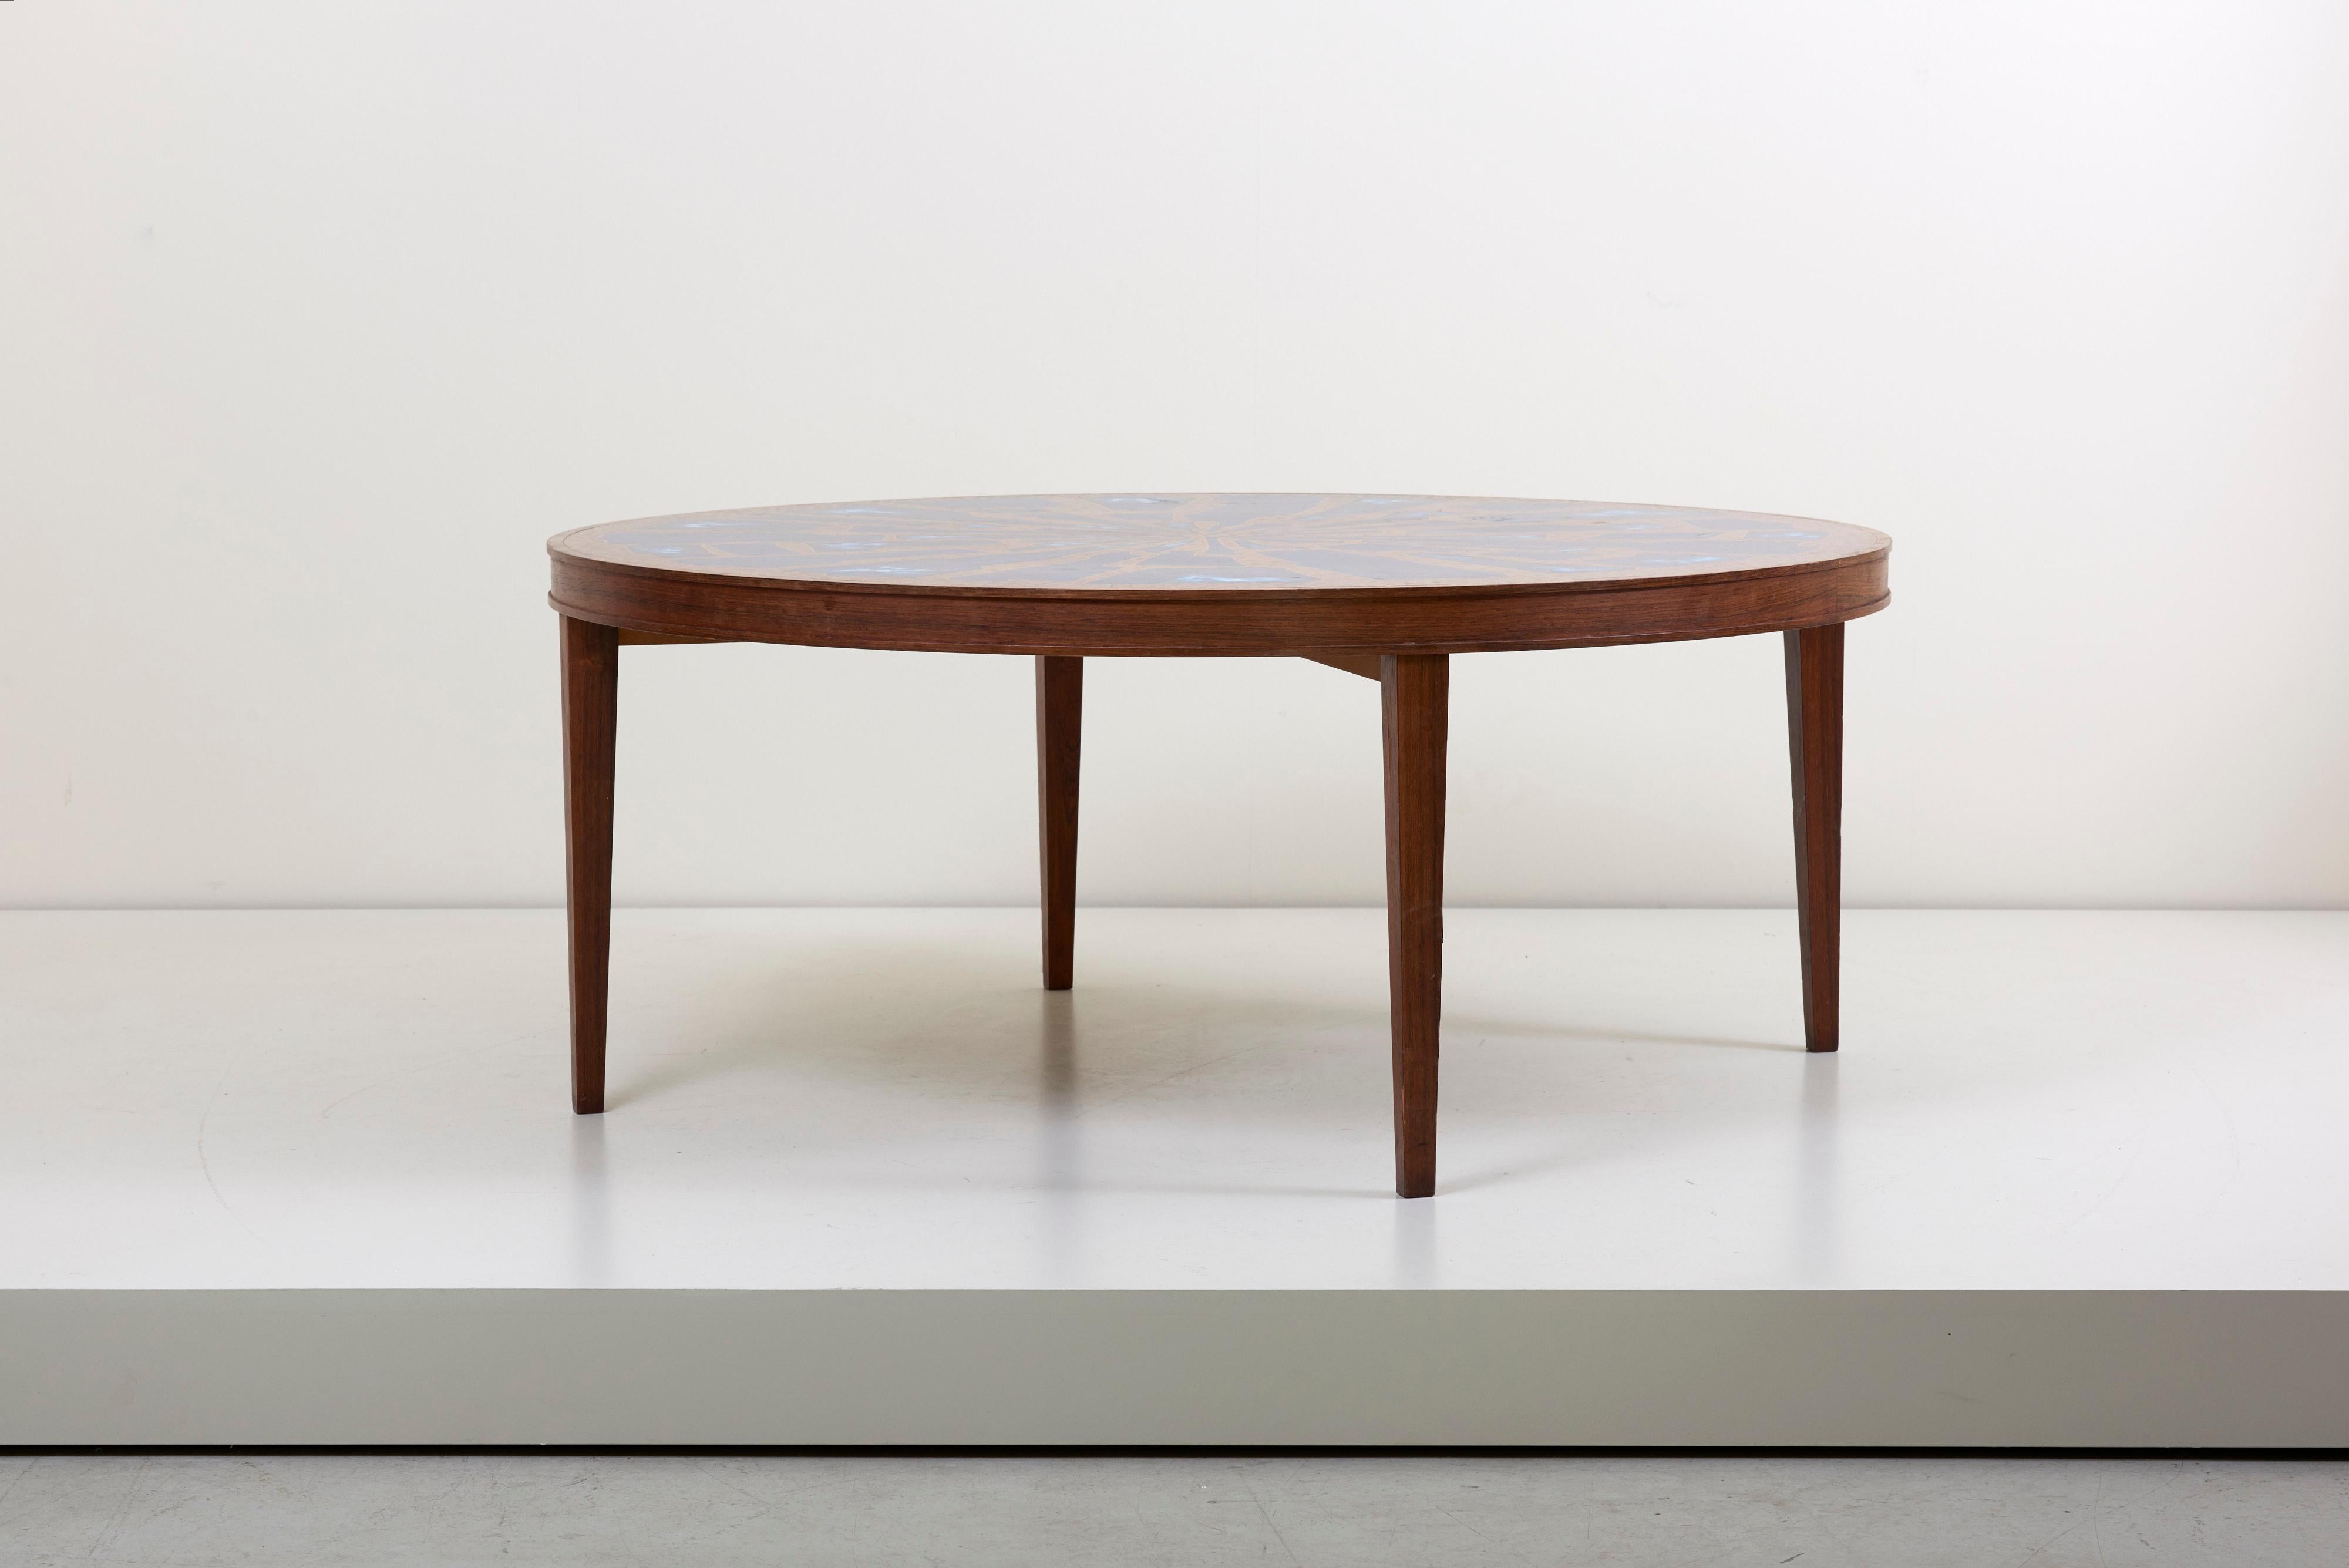 Ultra rare and wooden coffee table with a stunning copper and enamel style table top. The coffee table has a impressive size and it is manufactured in very high quality.